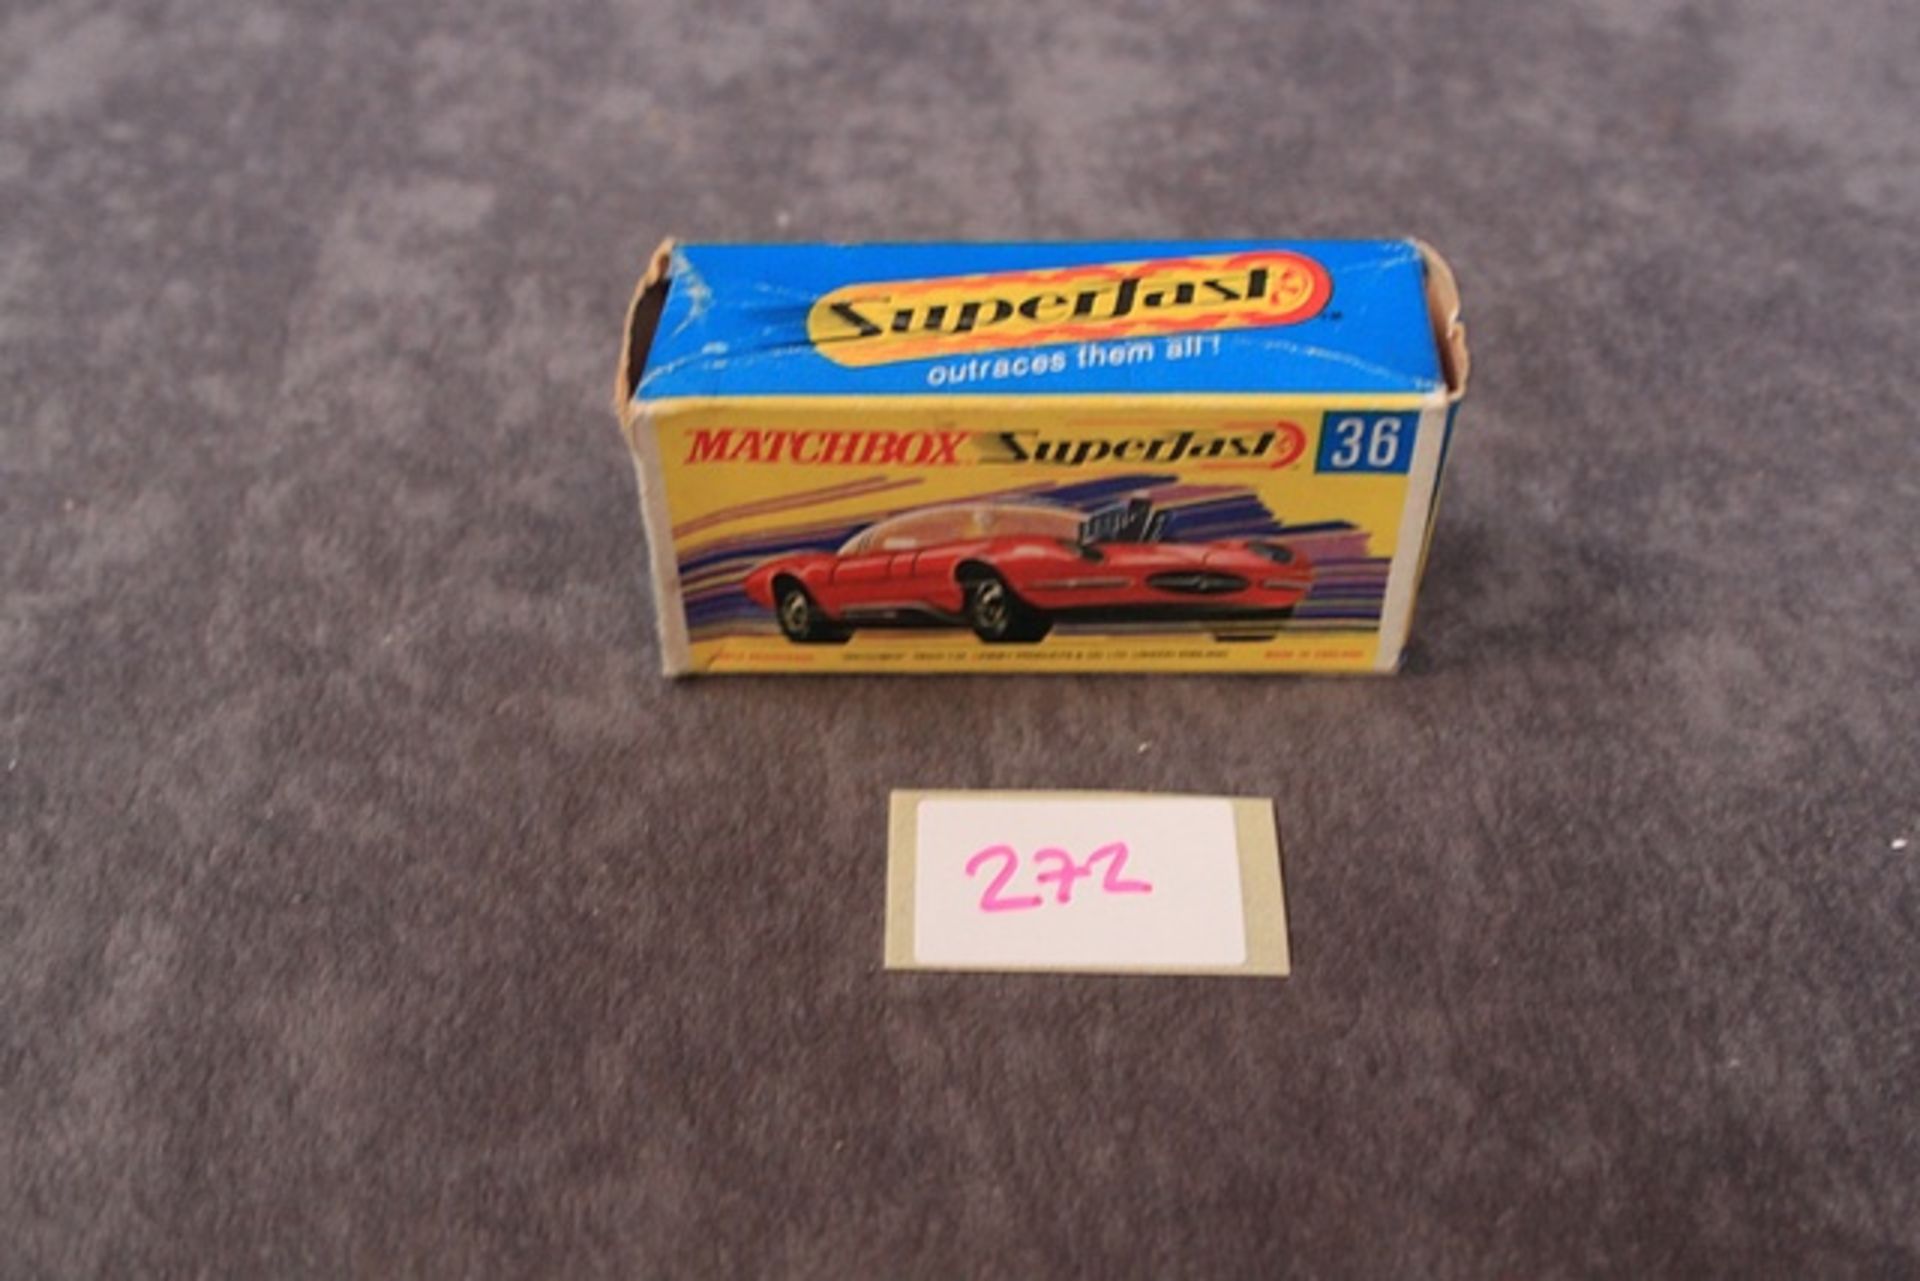 Mint Matchbox Superfast Diecast # 36 Dragster In Very Good Box - Image 3 of 3